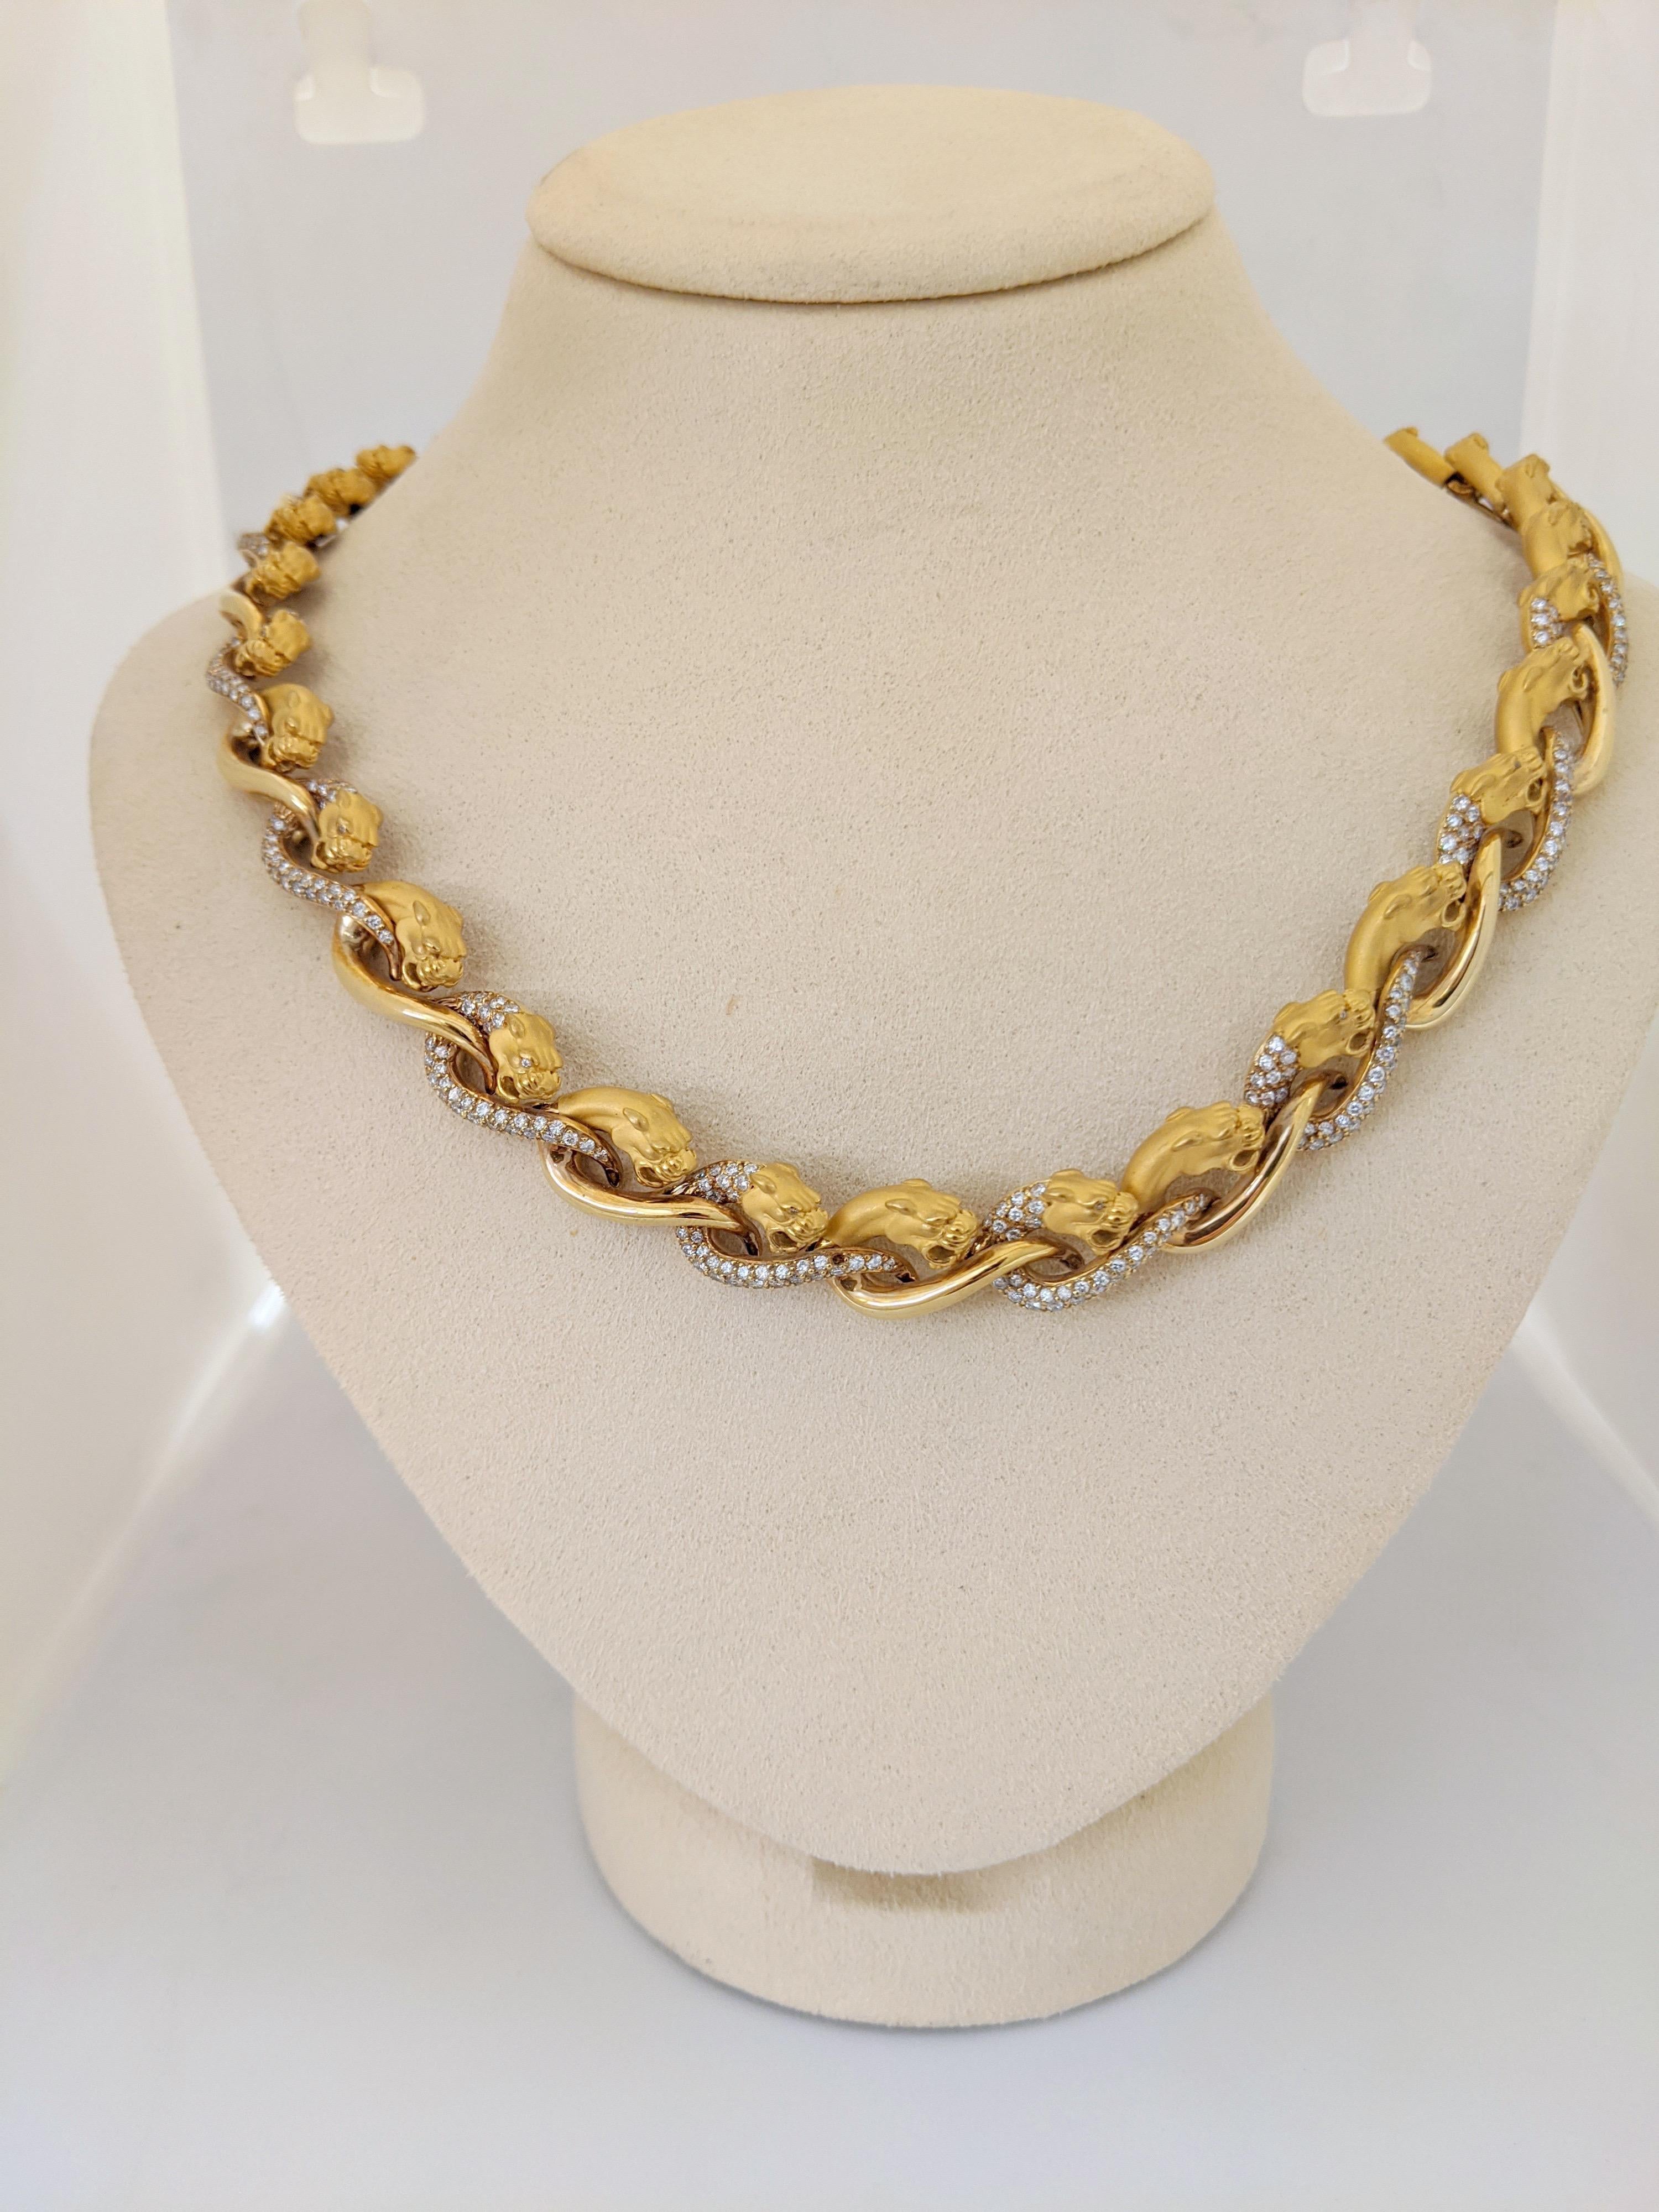 Carrera Y Carrera has built its its famous name on figurative designs, an obsession with surface finishes, and a compelling way of seeing beauty in art and nature. This 18 karat yellow gold and diamond panther necklace is the perfect example of